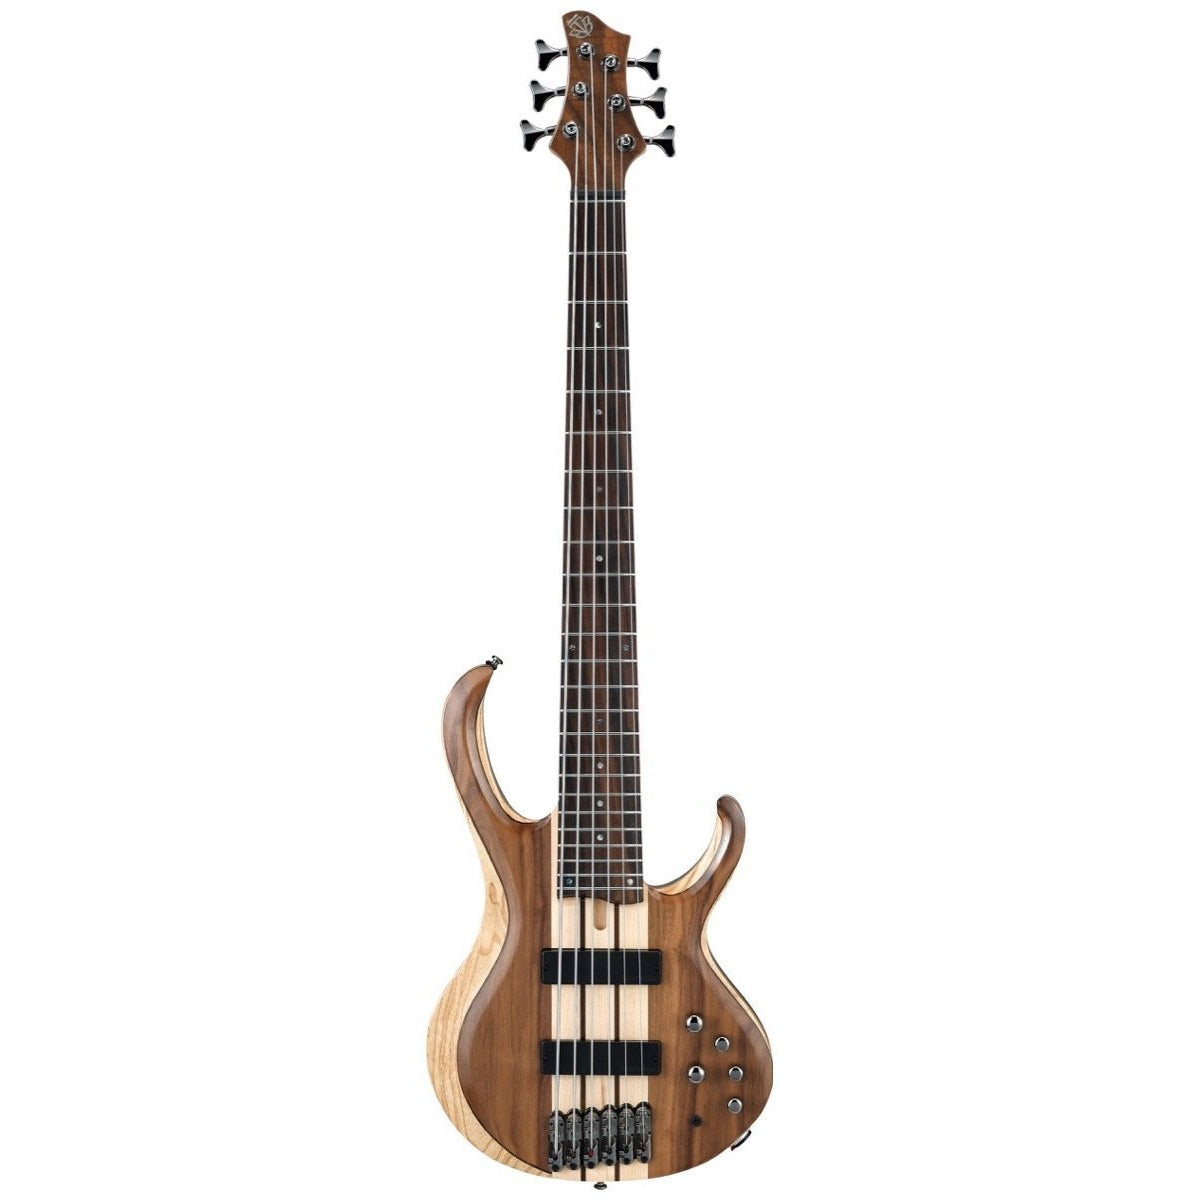 Ibanez BTB746 Electric Bass, 6-String, Natural Low Gloss